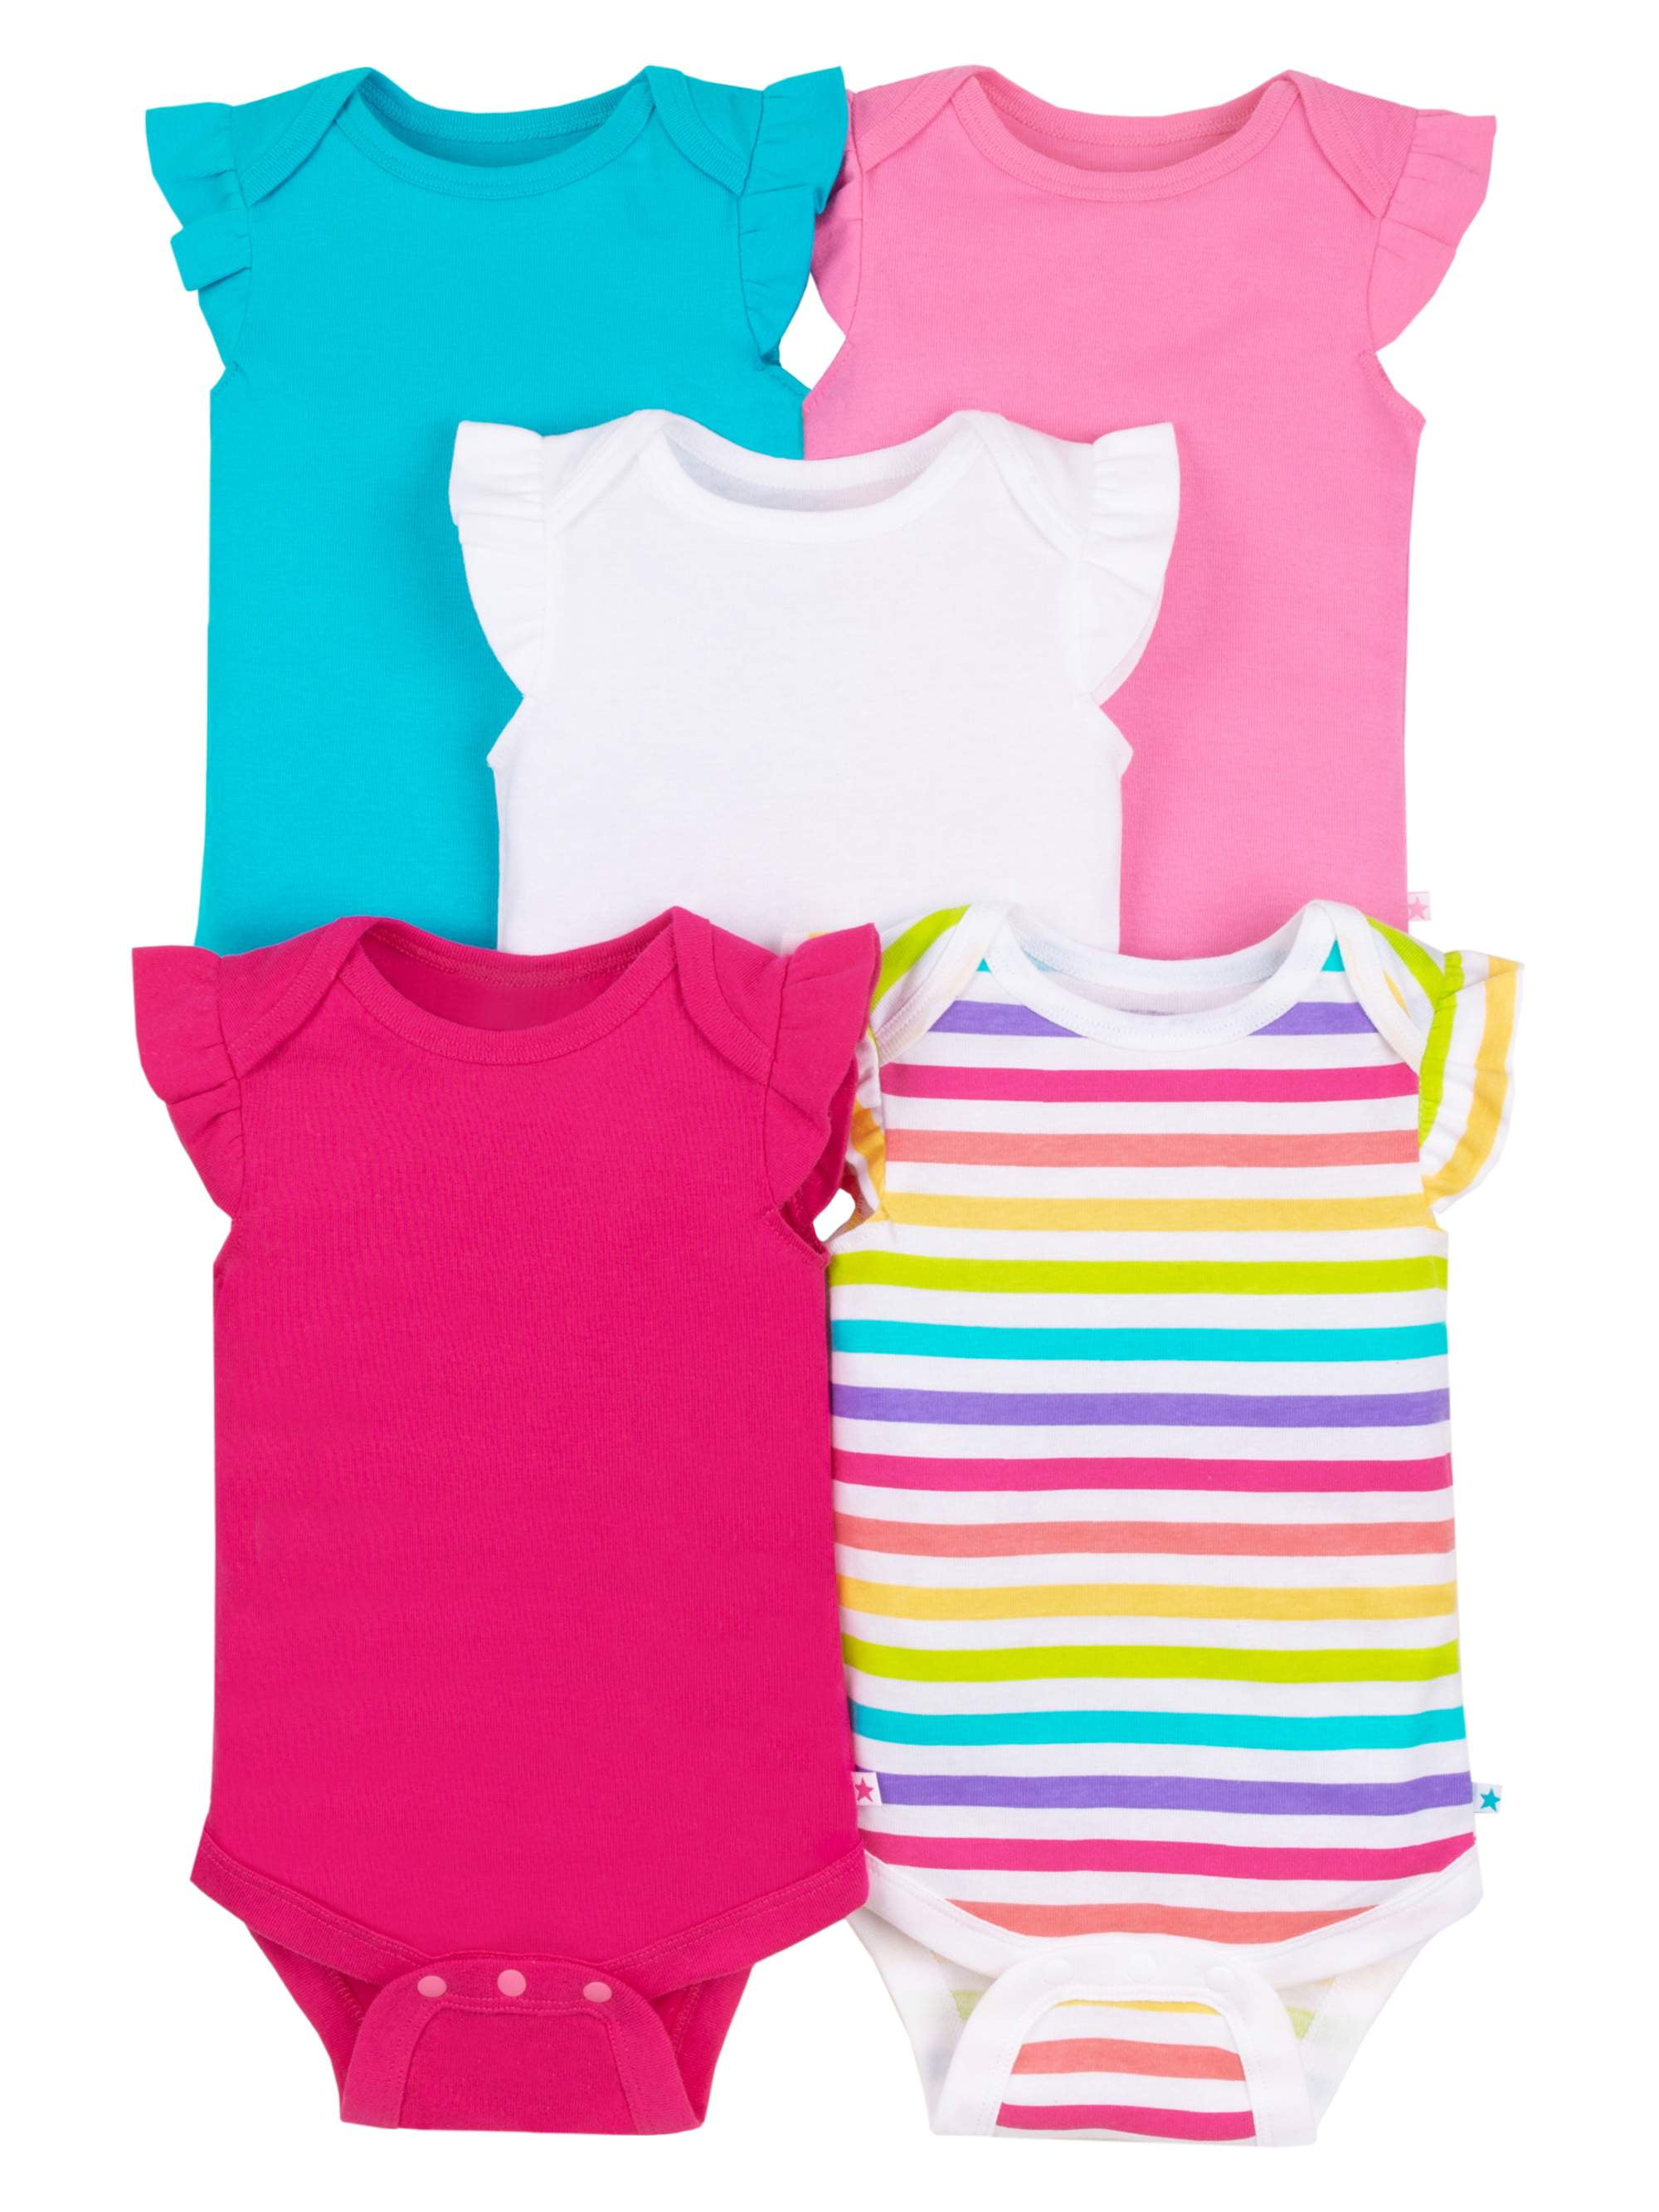 Details about   Infant Creeper Bodysuit One Piece T-shirt Dreams Are Wishes The Heart Make k-411 